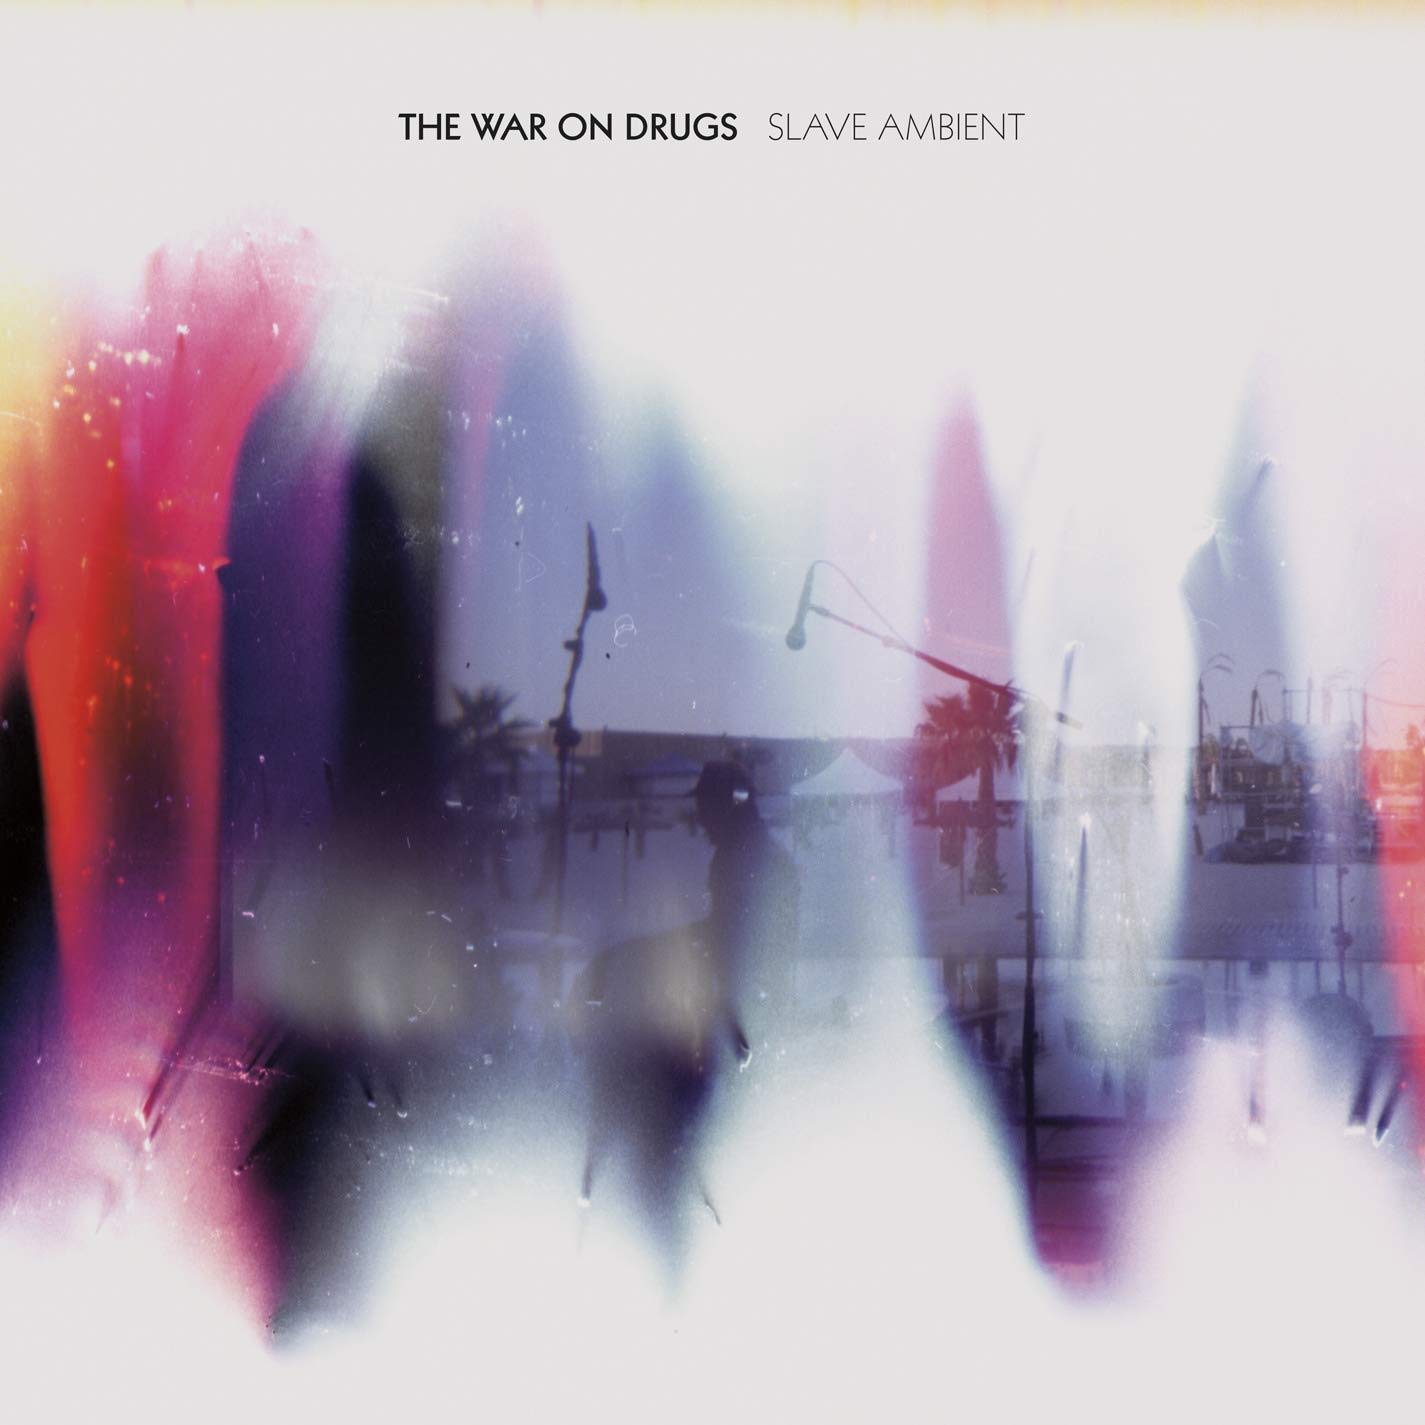 The War on Drugs "Slave ambient" LP